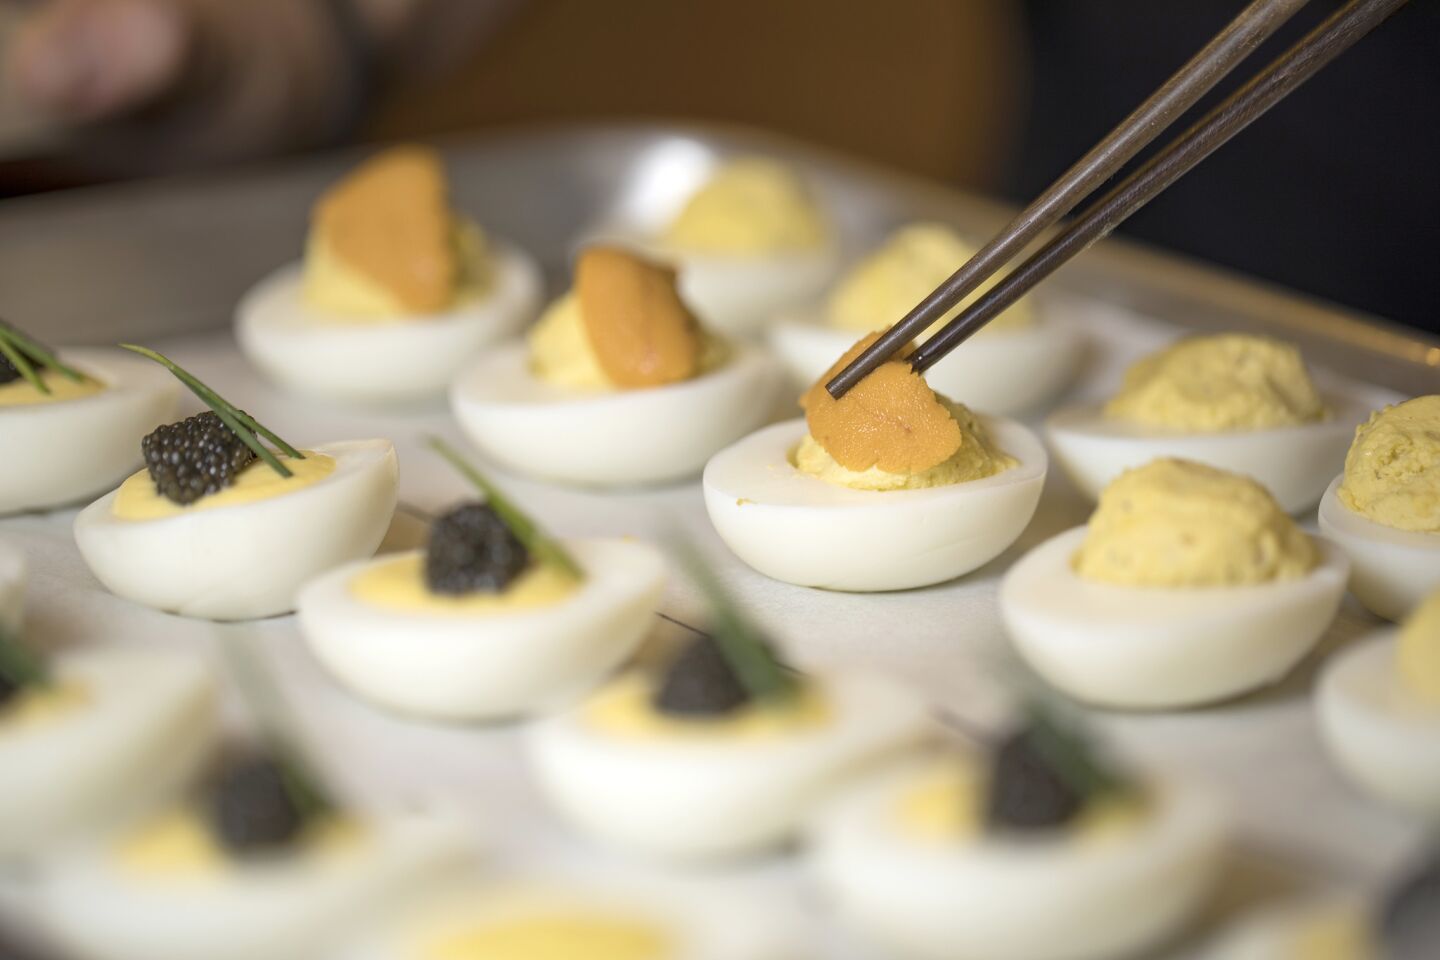 12 recipes for deviled eggs »